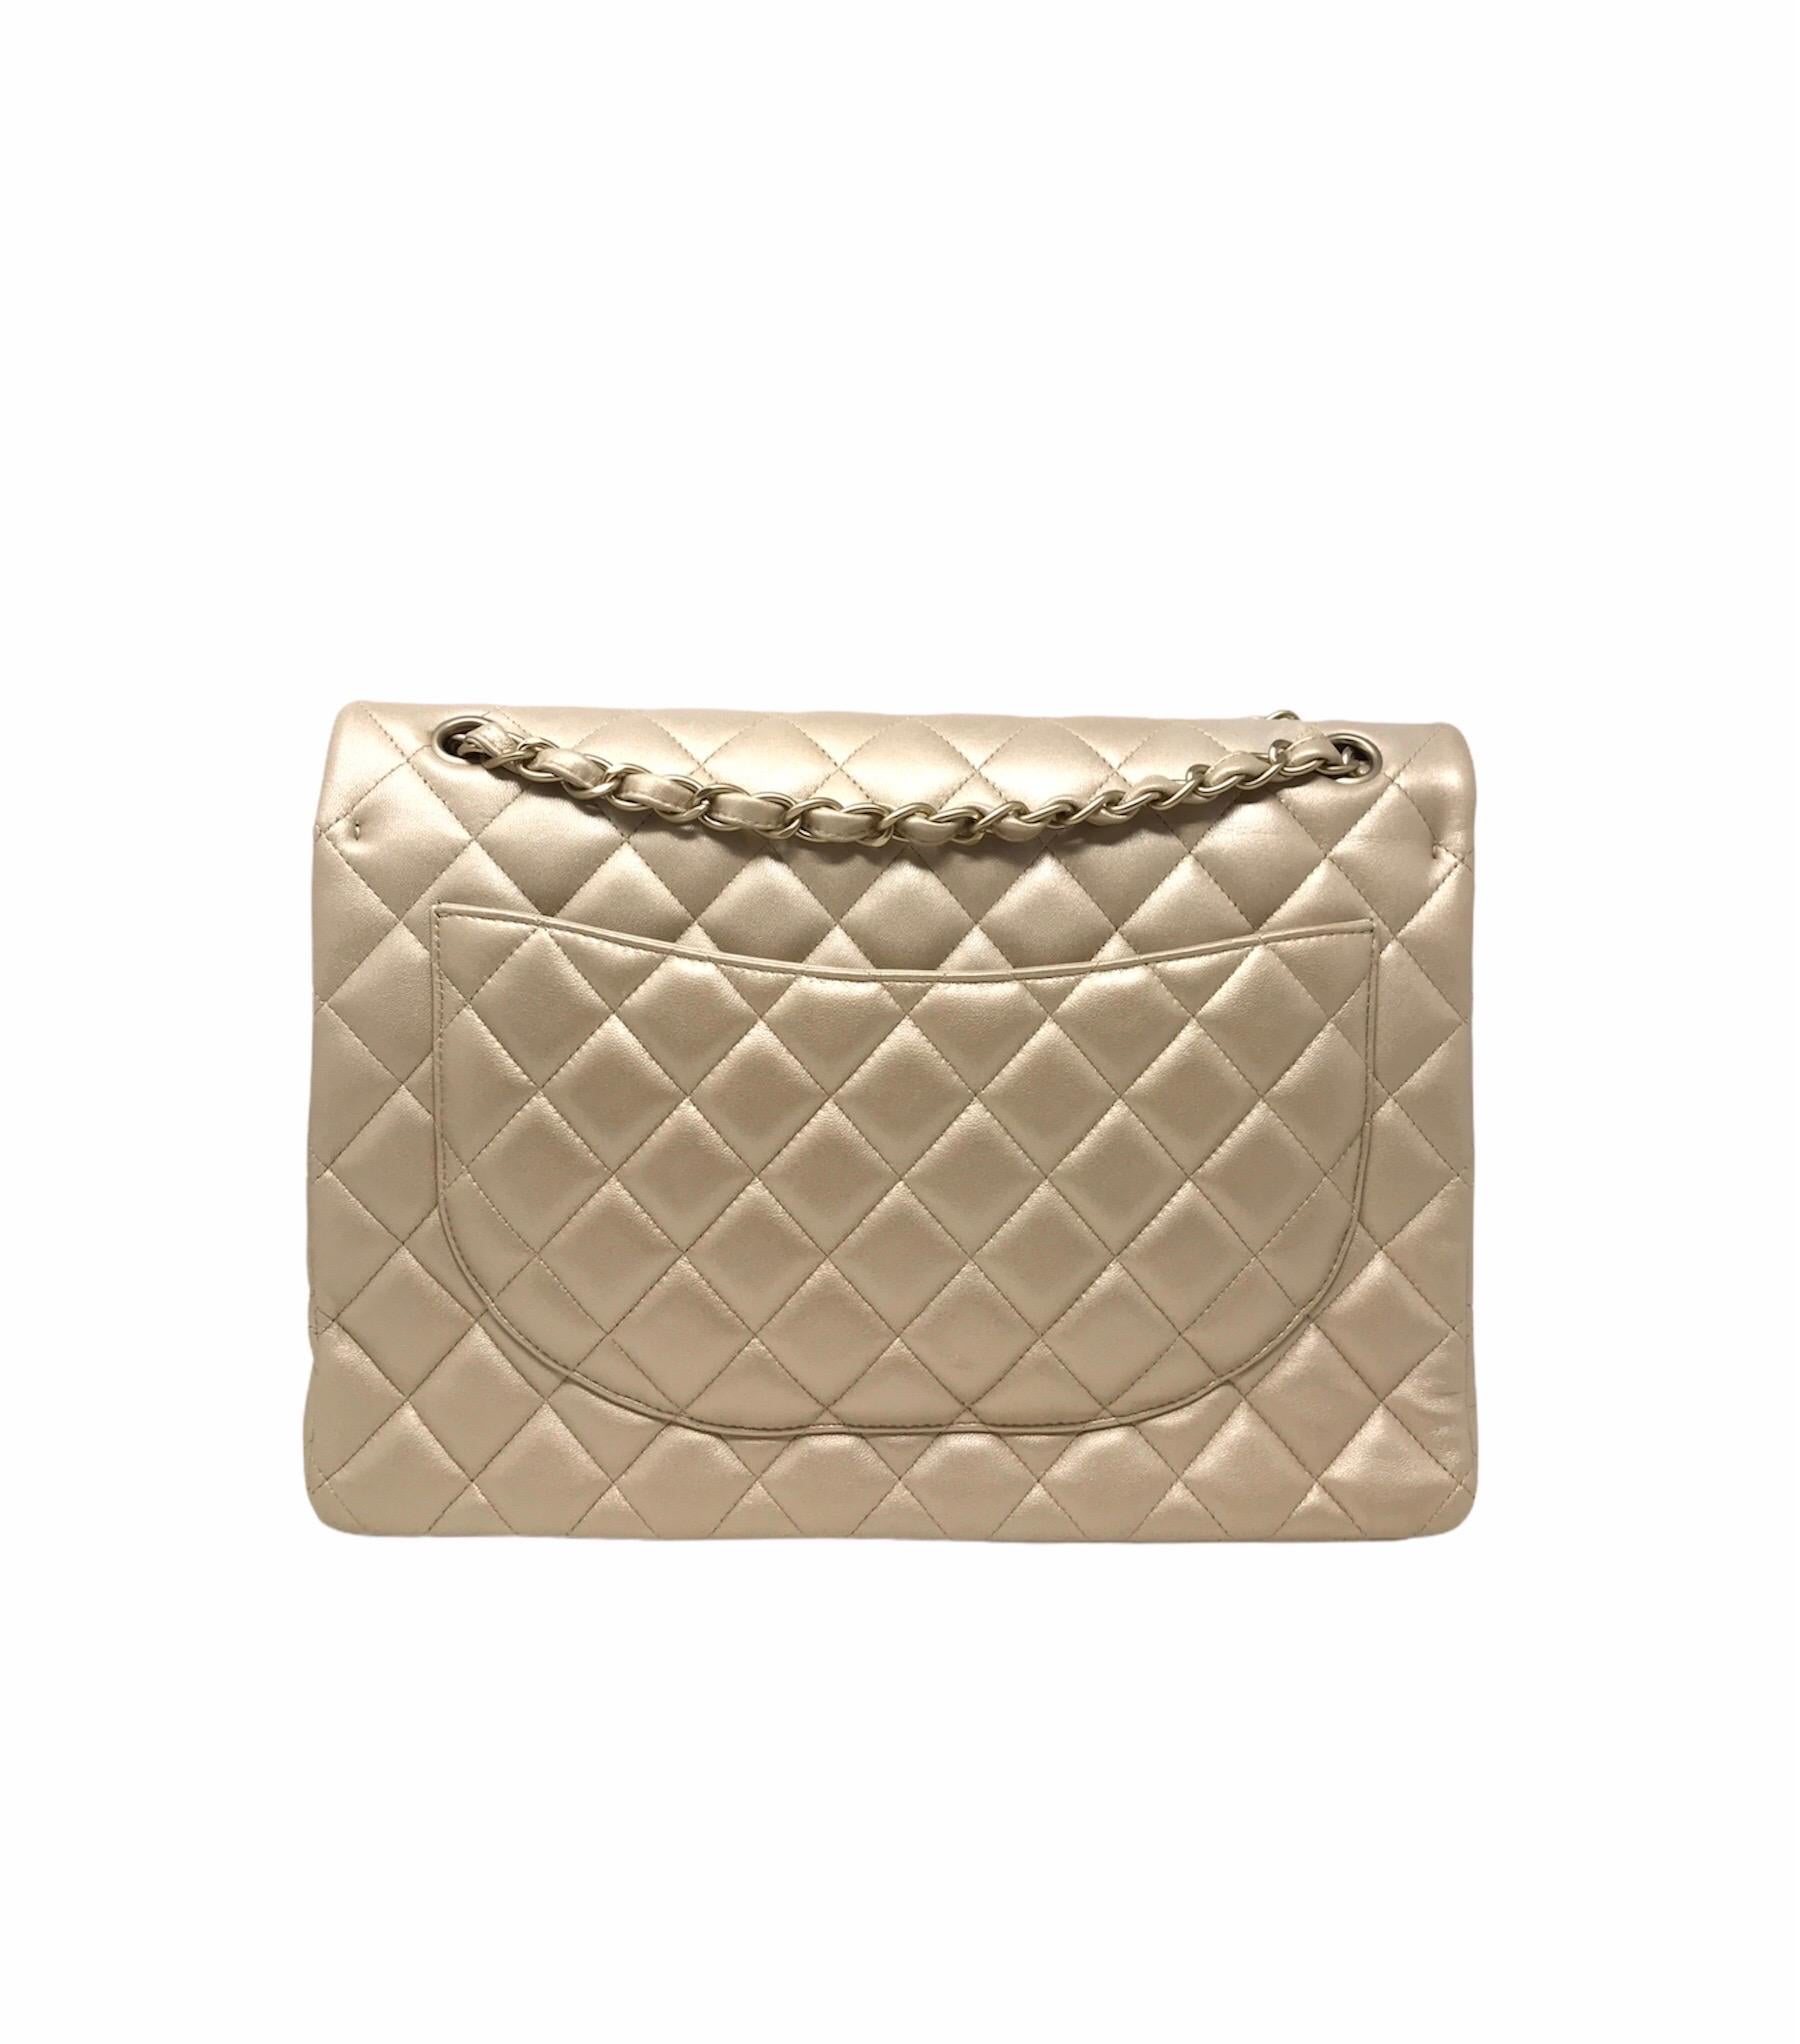 Chanel Maxi Classic Double Flap Bag 2012 in smooth lamb smeared gold, hdw satin excellent condition double internal flap , year of production 2012 , it is carried on shoulder or shoulder, very rare and unique color bag is not equipped with